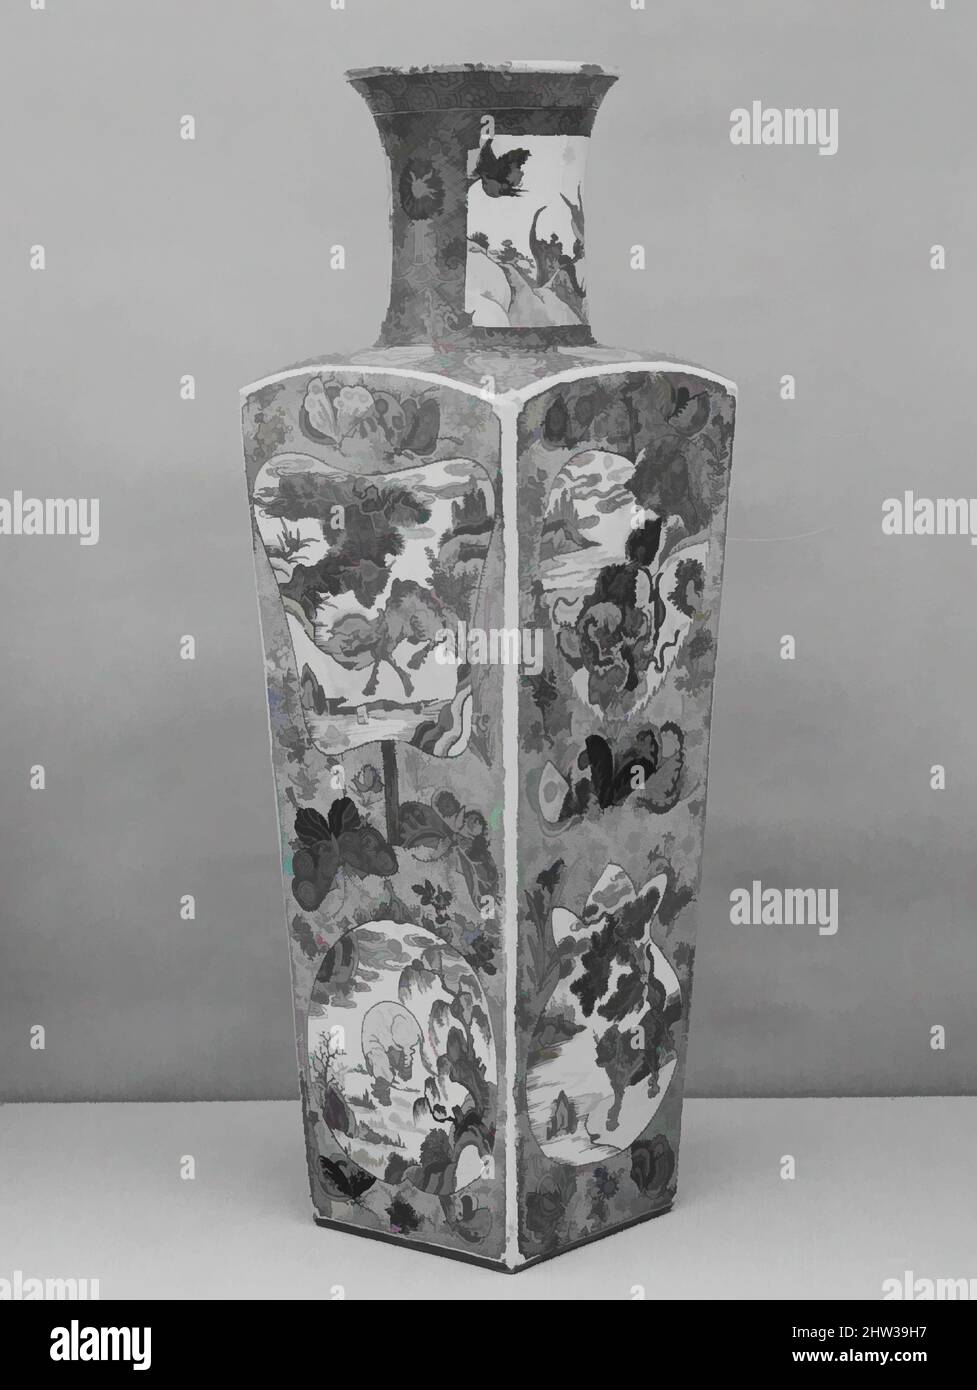 Art inspired by Vase with Animals and Mythical Creatures, Qing dynasty (1644–1911), Kangxi period (1662–1722), early 18th century, China, Porcelain painted with colored enamels over transparent glaze (Jingdezhen ware), H. 18 3/4 in. (47.6 cm), Ceramics, Porcelains painted with enamels, Classic works modernized by Artotop with a splash of modernity. Shapes, color and value, eye-catching visual impact on art. Emotions through freedom of artworks in a contemporary way. A timeless message pursuing a wildly creative new direction. Artists turning to the digital medium and creating the Artotop NFT Stock Photo